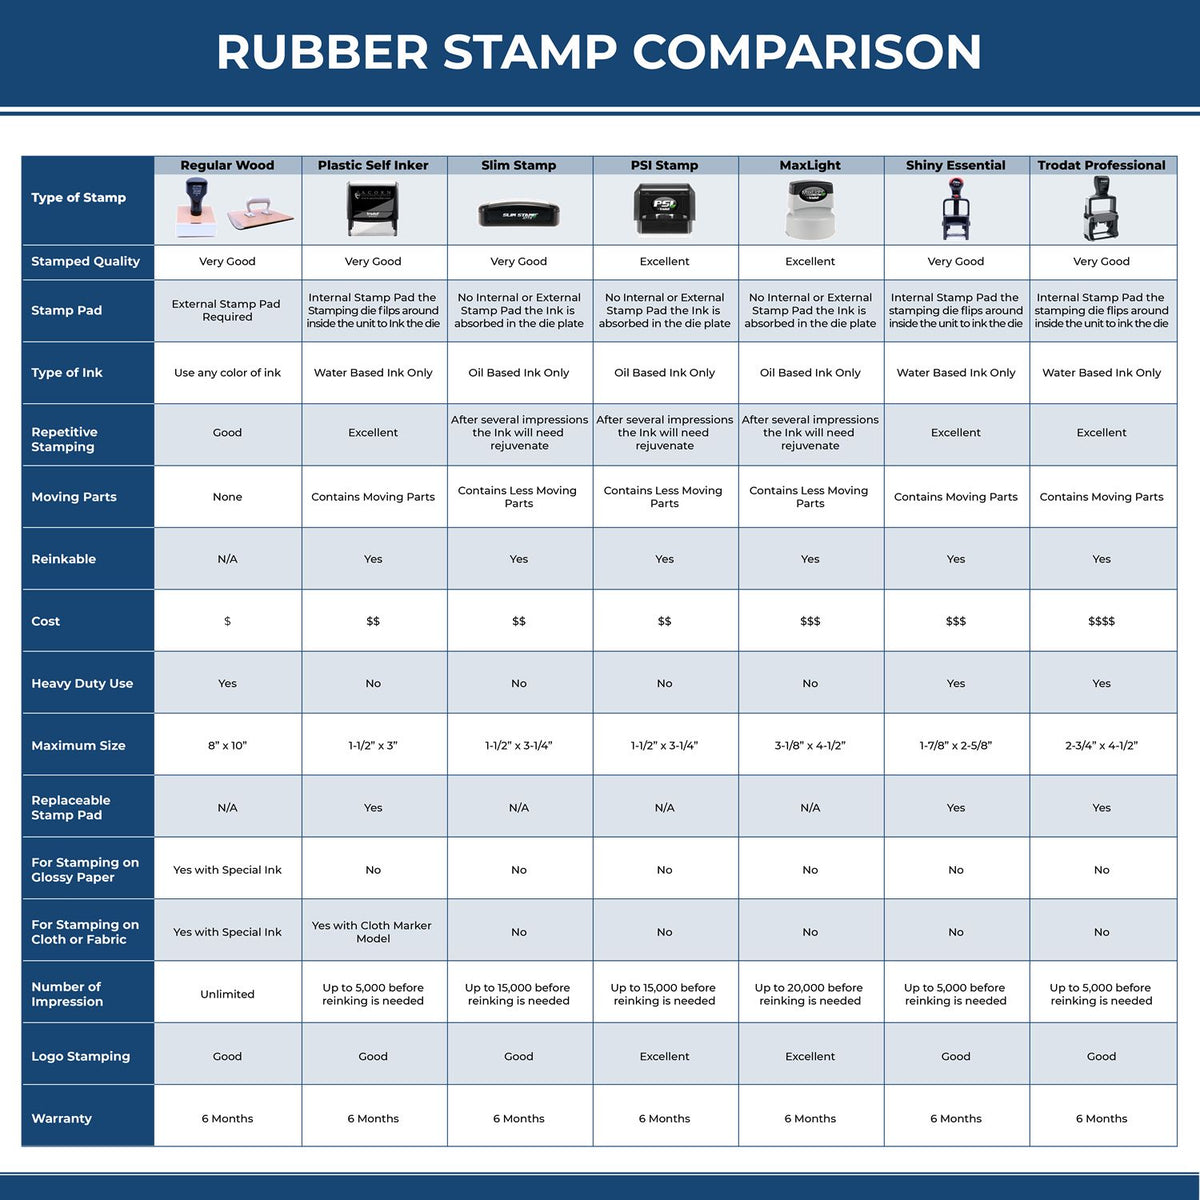 Large Self Inking Title Work Stamp 4581S Rubber Stamp Comparison